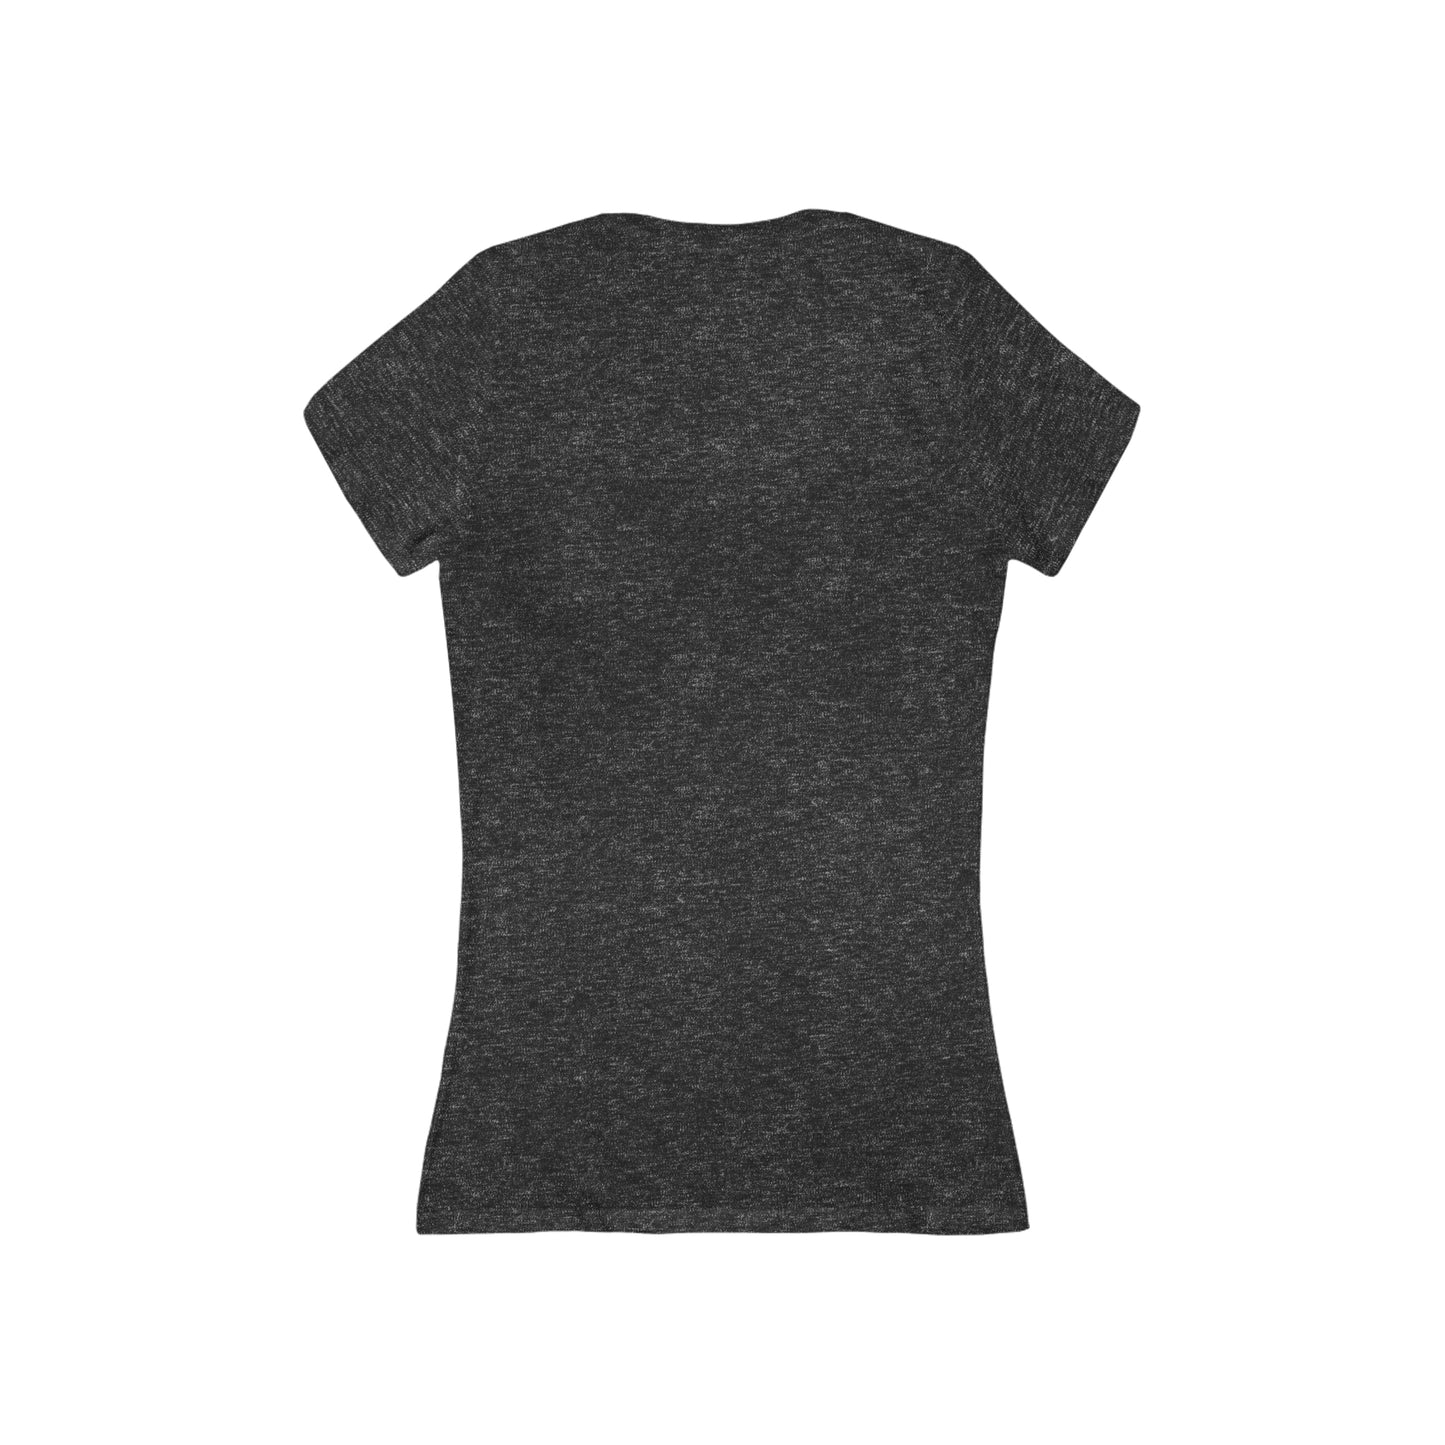 SILVER Hair Anarchy, short sleeve deep v-neck t-shirt, for women embracing silver and gray hair